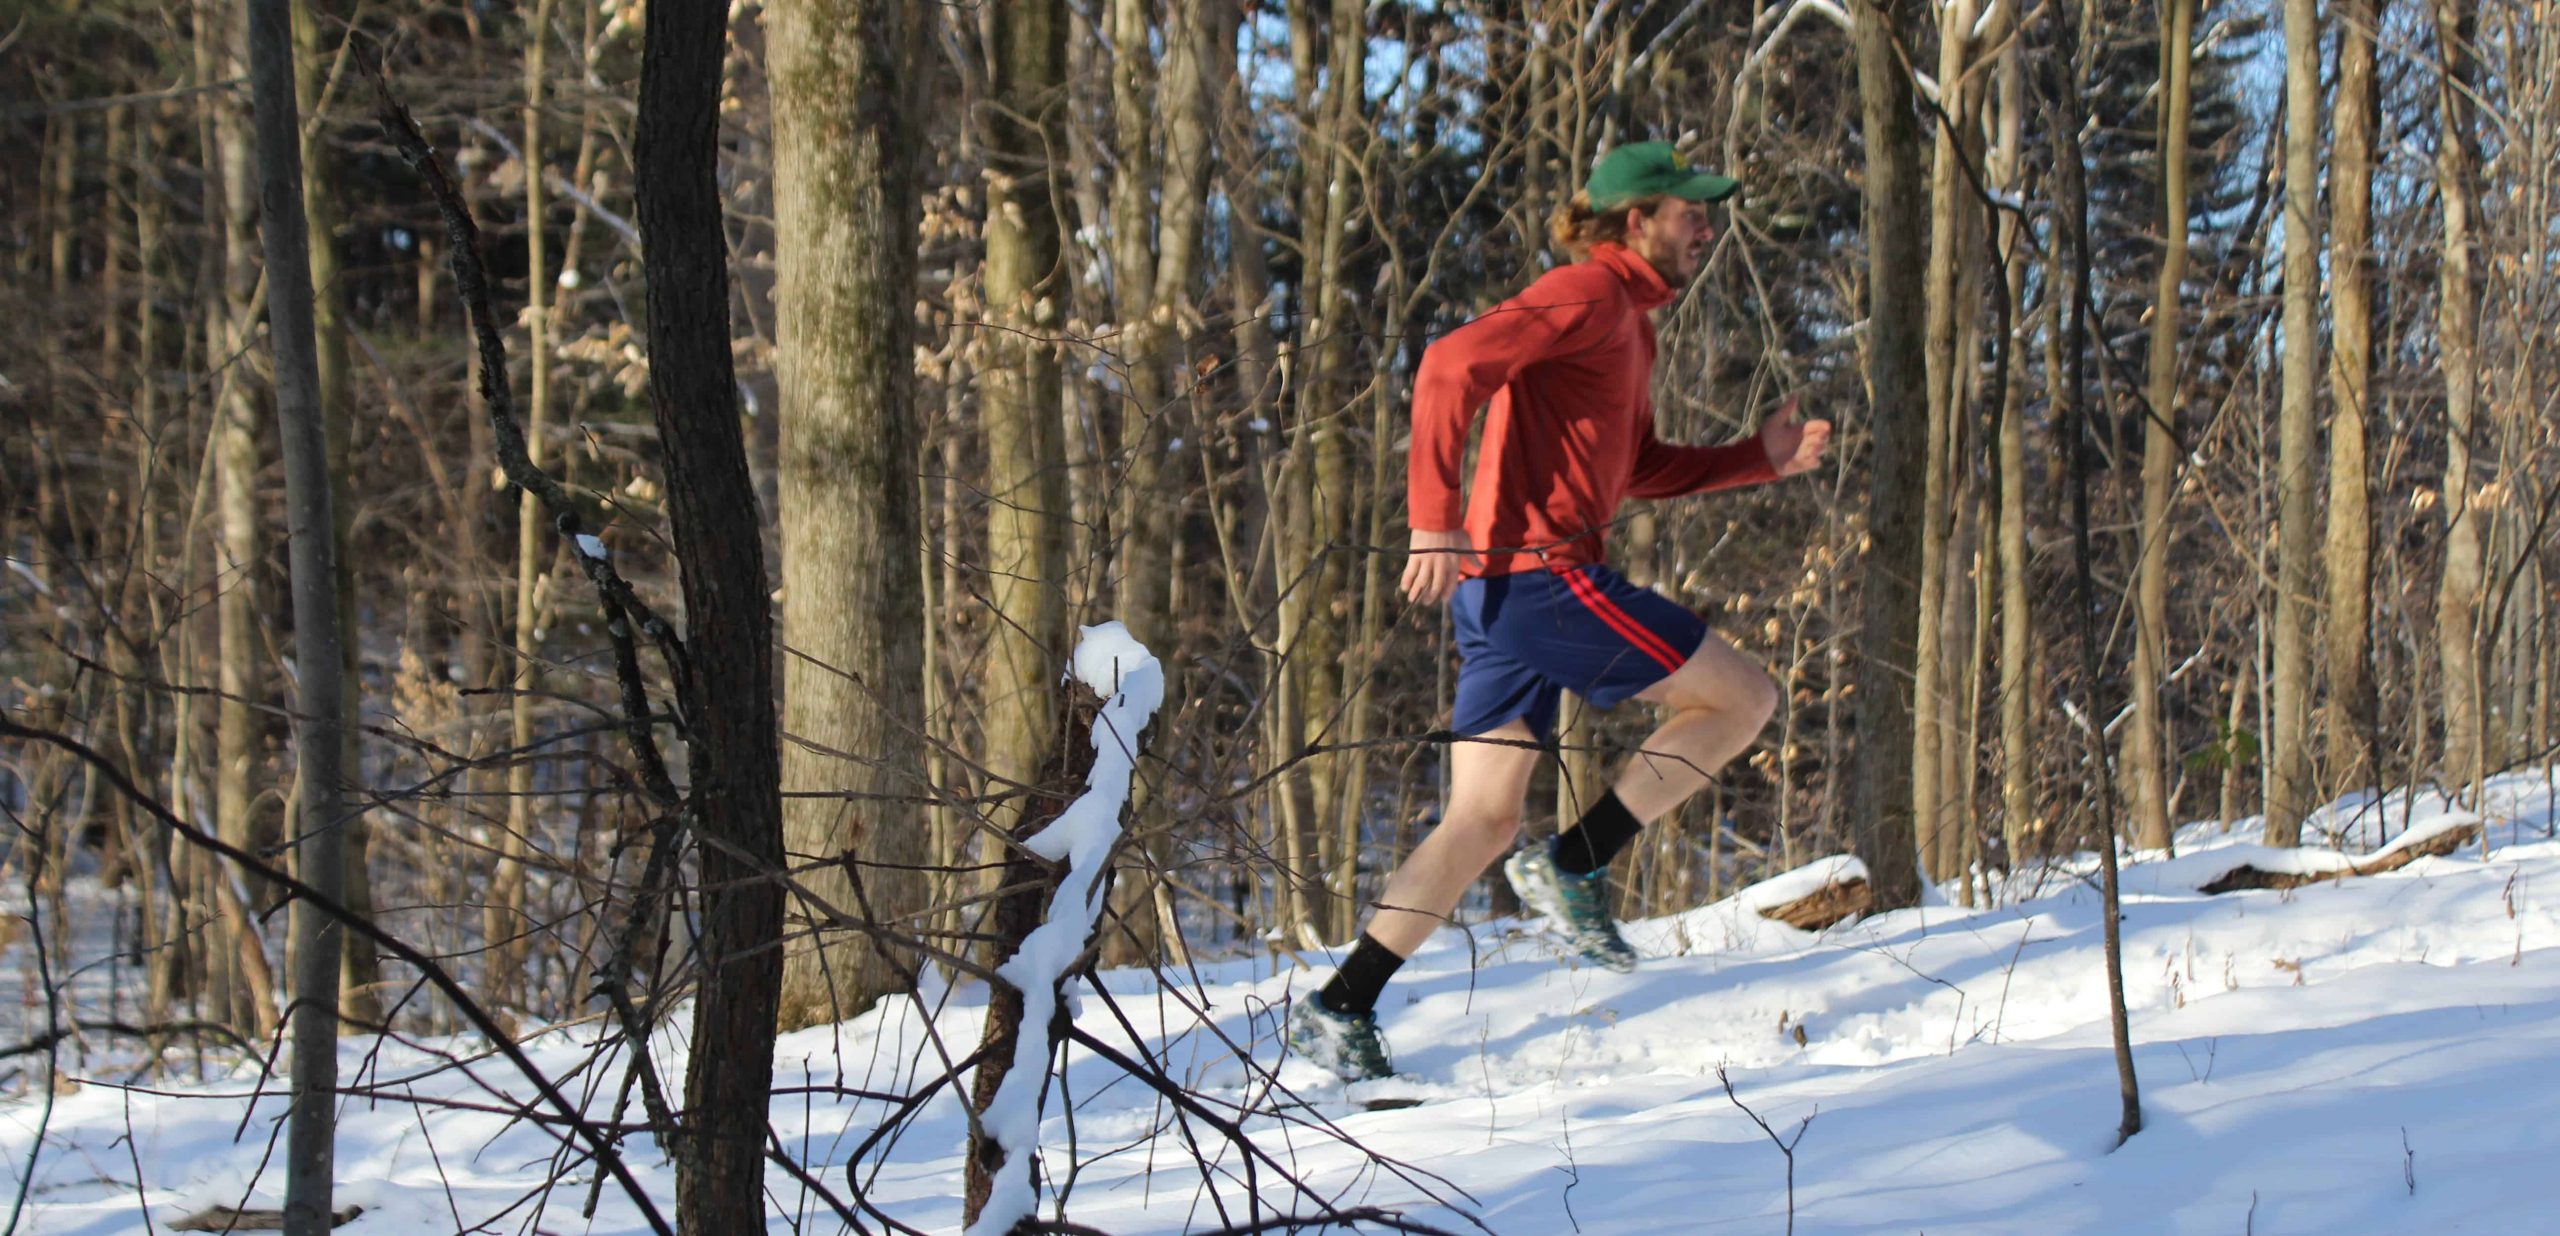 Trail Running in Cold Weather